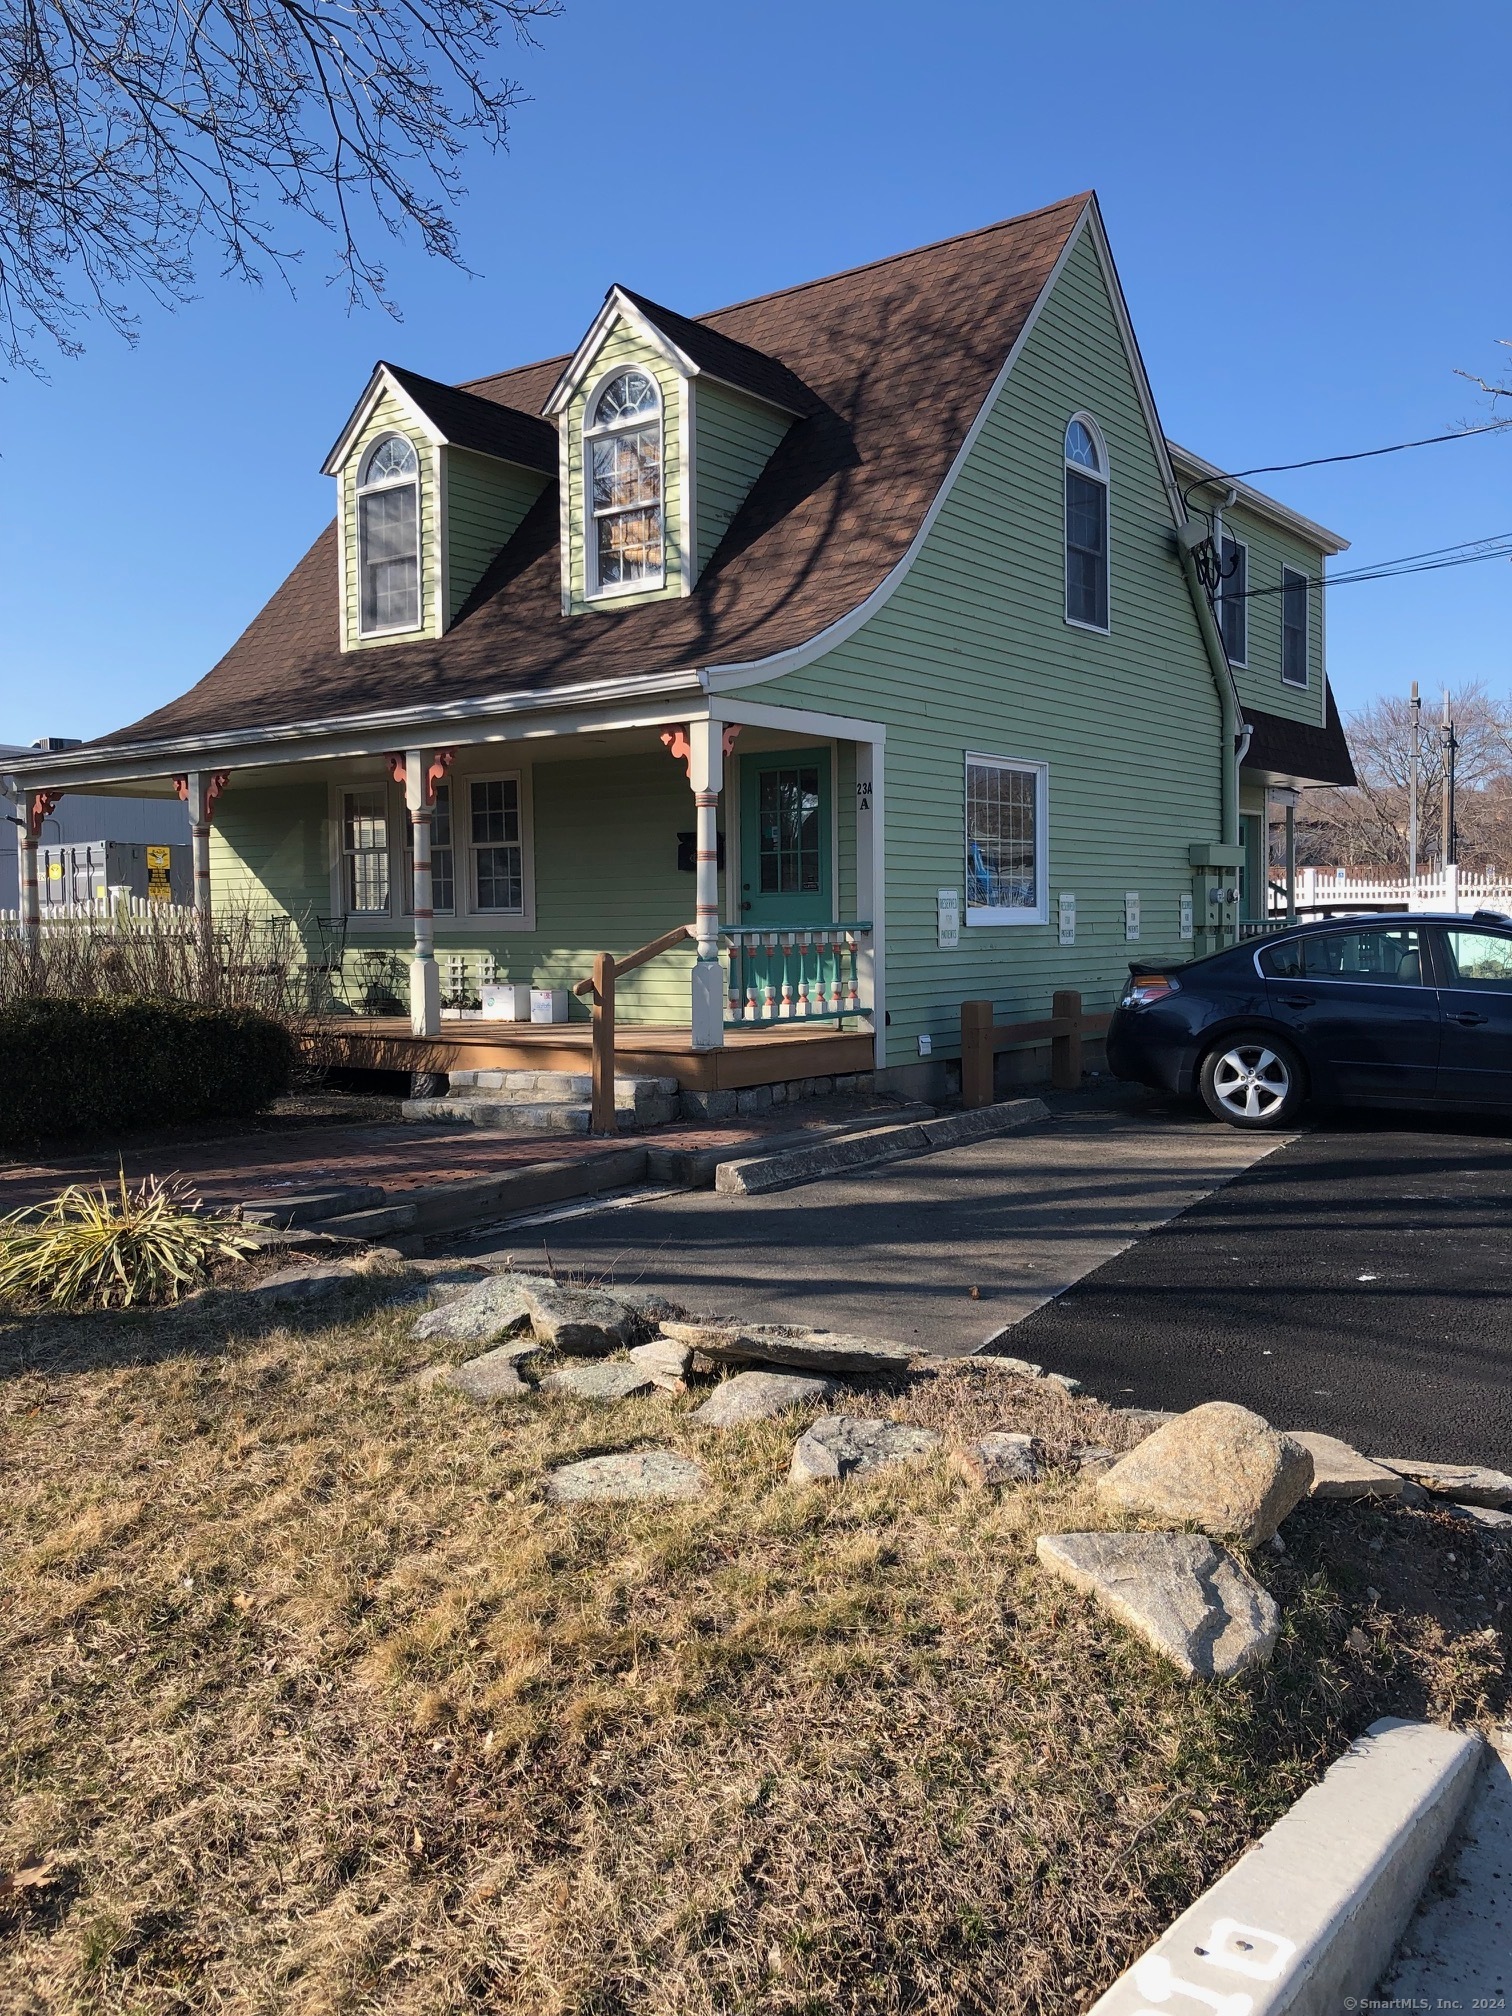 Rental Property at 23 W Main Street, Clinton, Connecticut - Bedrooms: 1 
Bathrooms: 1 
Rooms: 3  - $1,600 MO.